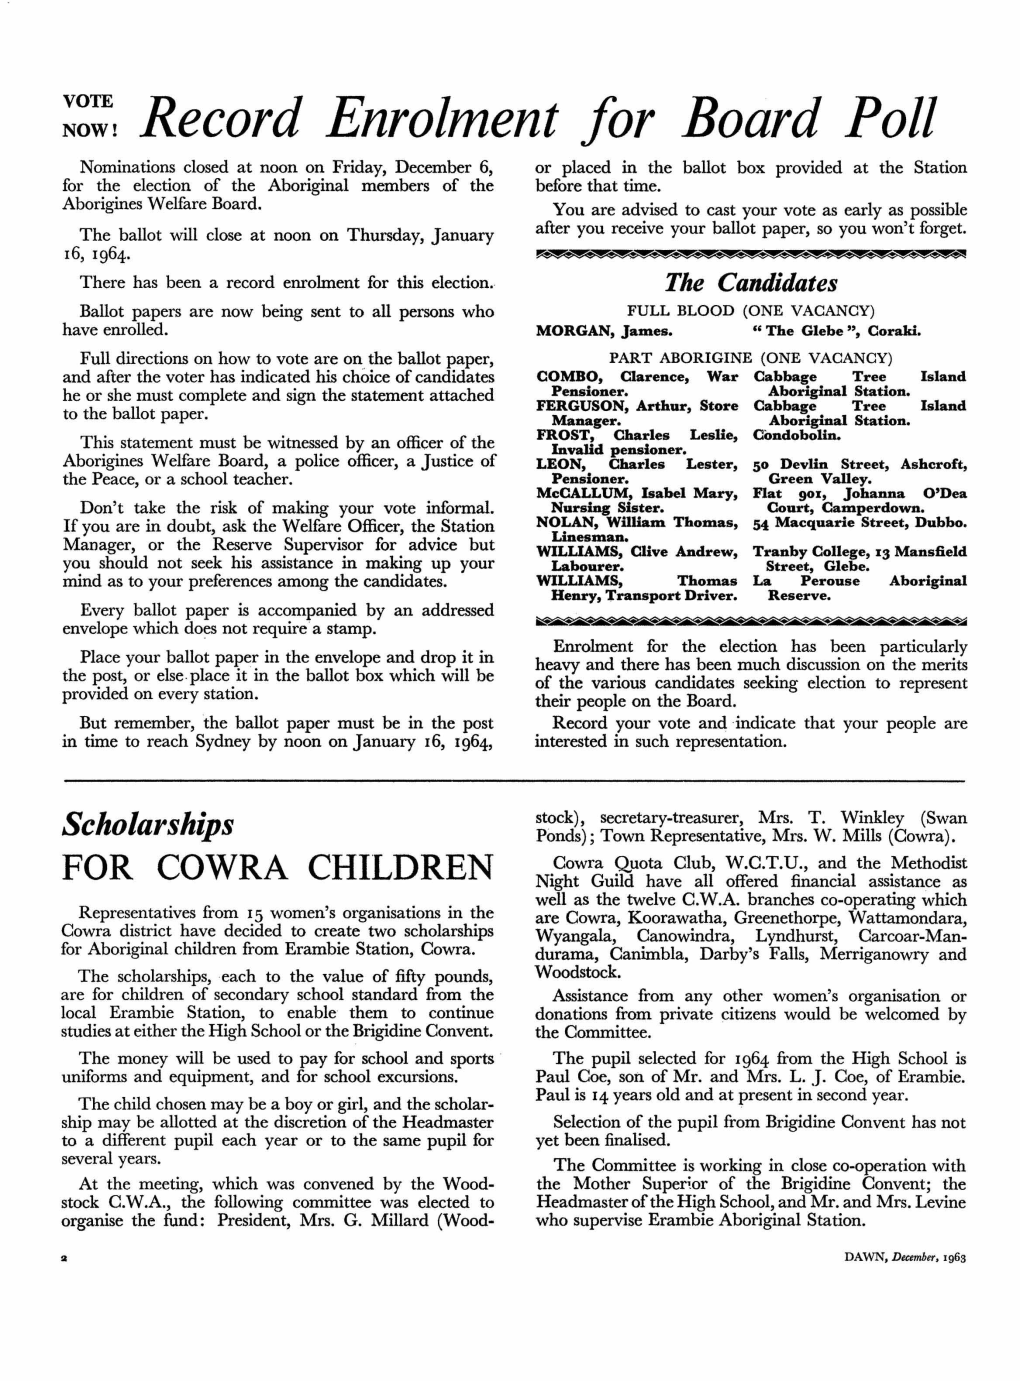 Volume 12 Issue 12, Page 2